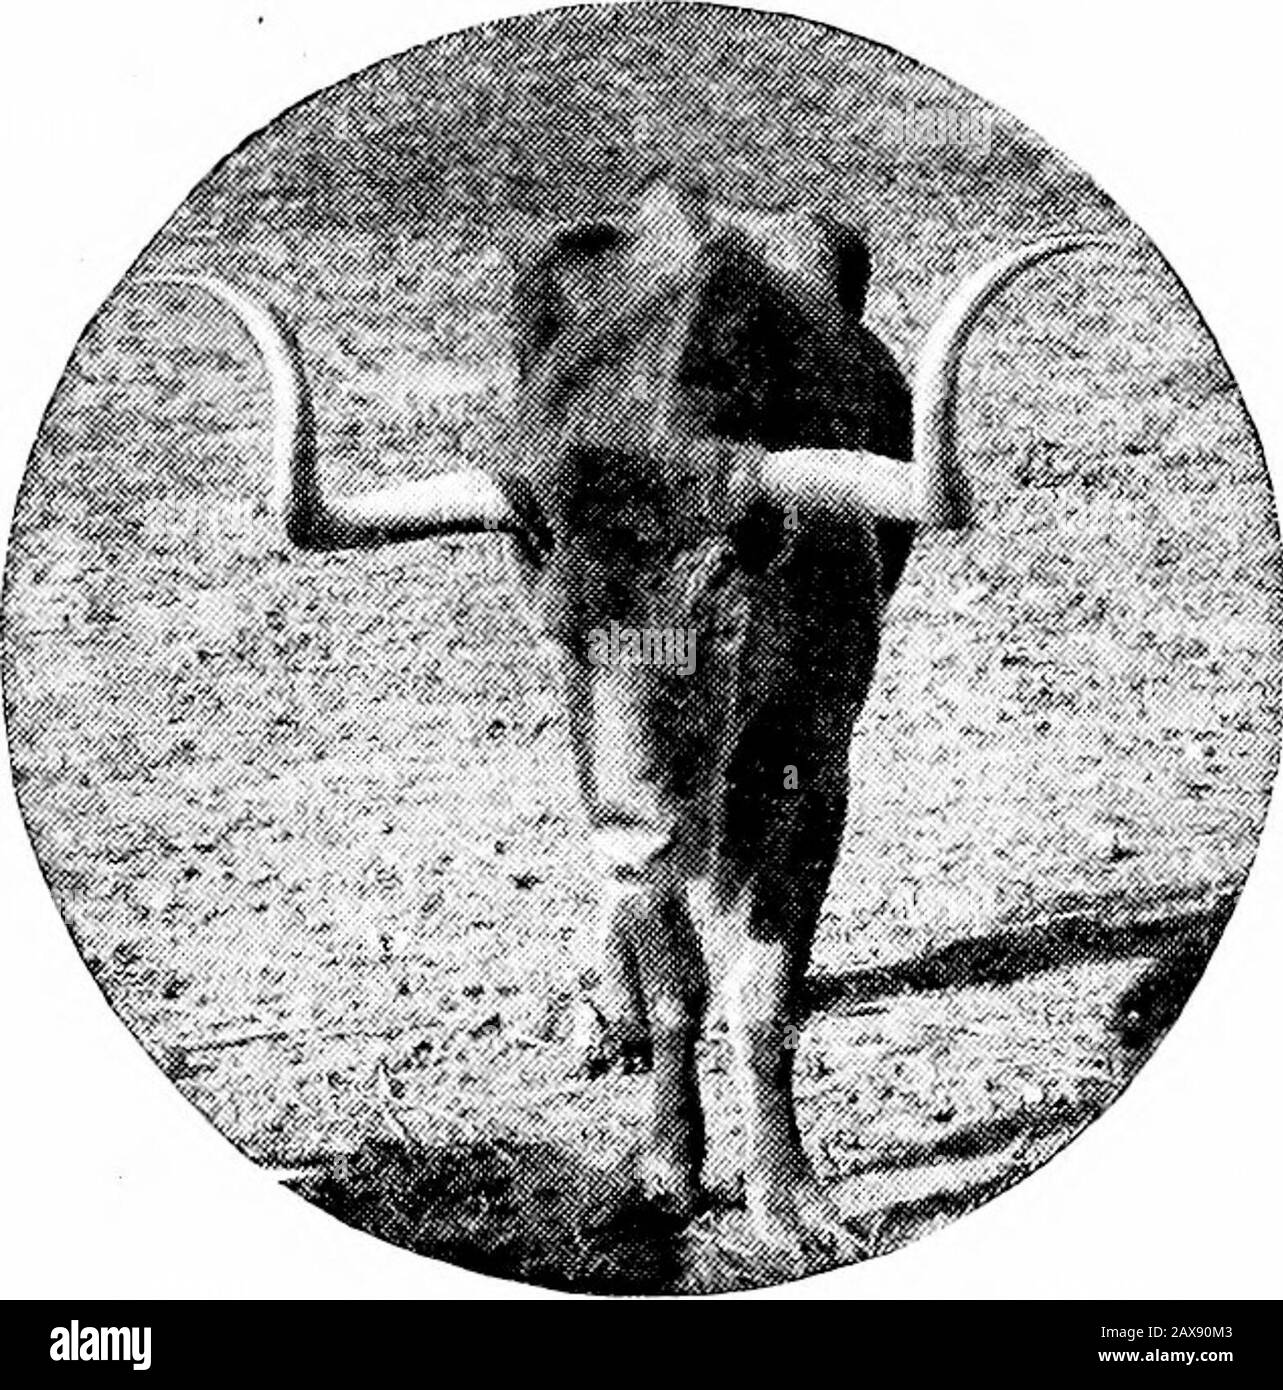 DrDavid Roberts' practical home veterinarian . ure bred strains in their herds. It would be interesting to trace the history of cattle, step by step, in their improve-ment from the earliest time, but from the facts which history gives it would be a hardmatter to get any satisfactory information. The first systematic breeder of whom wehave any record was Jacob. It is reasonably certain that he understood something ofthe principles of mating cattle, but did not use his understanding so much in the matterof improving the breed, or to the good qualities for milking or beef, as he did in pro-ducing Stock Photo